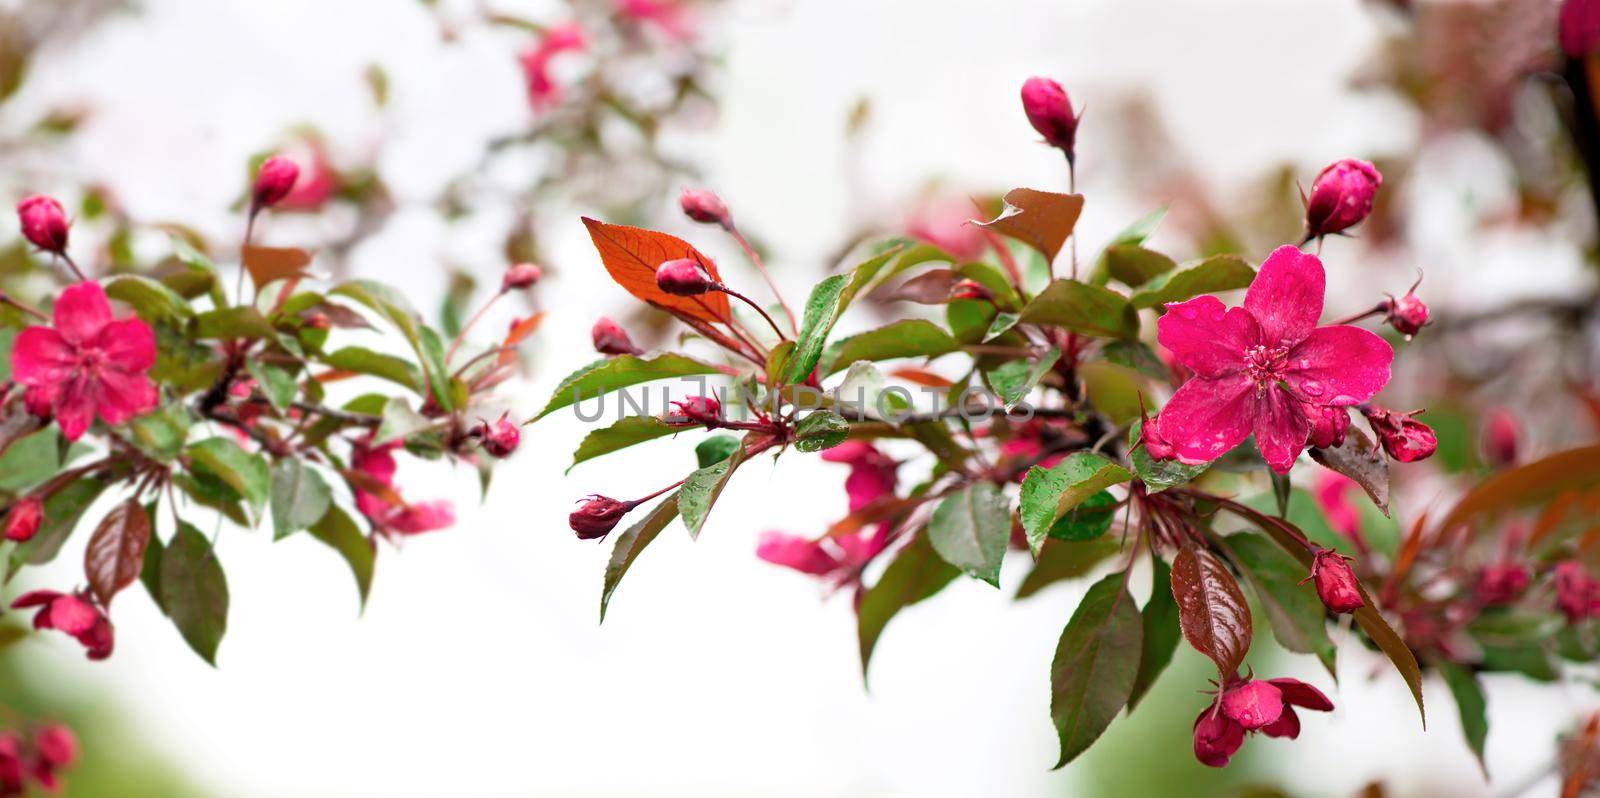 Blooming paradise apple tree buds. Wonderful natural background with pink flowers on a branch.